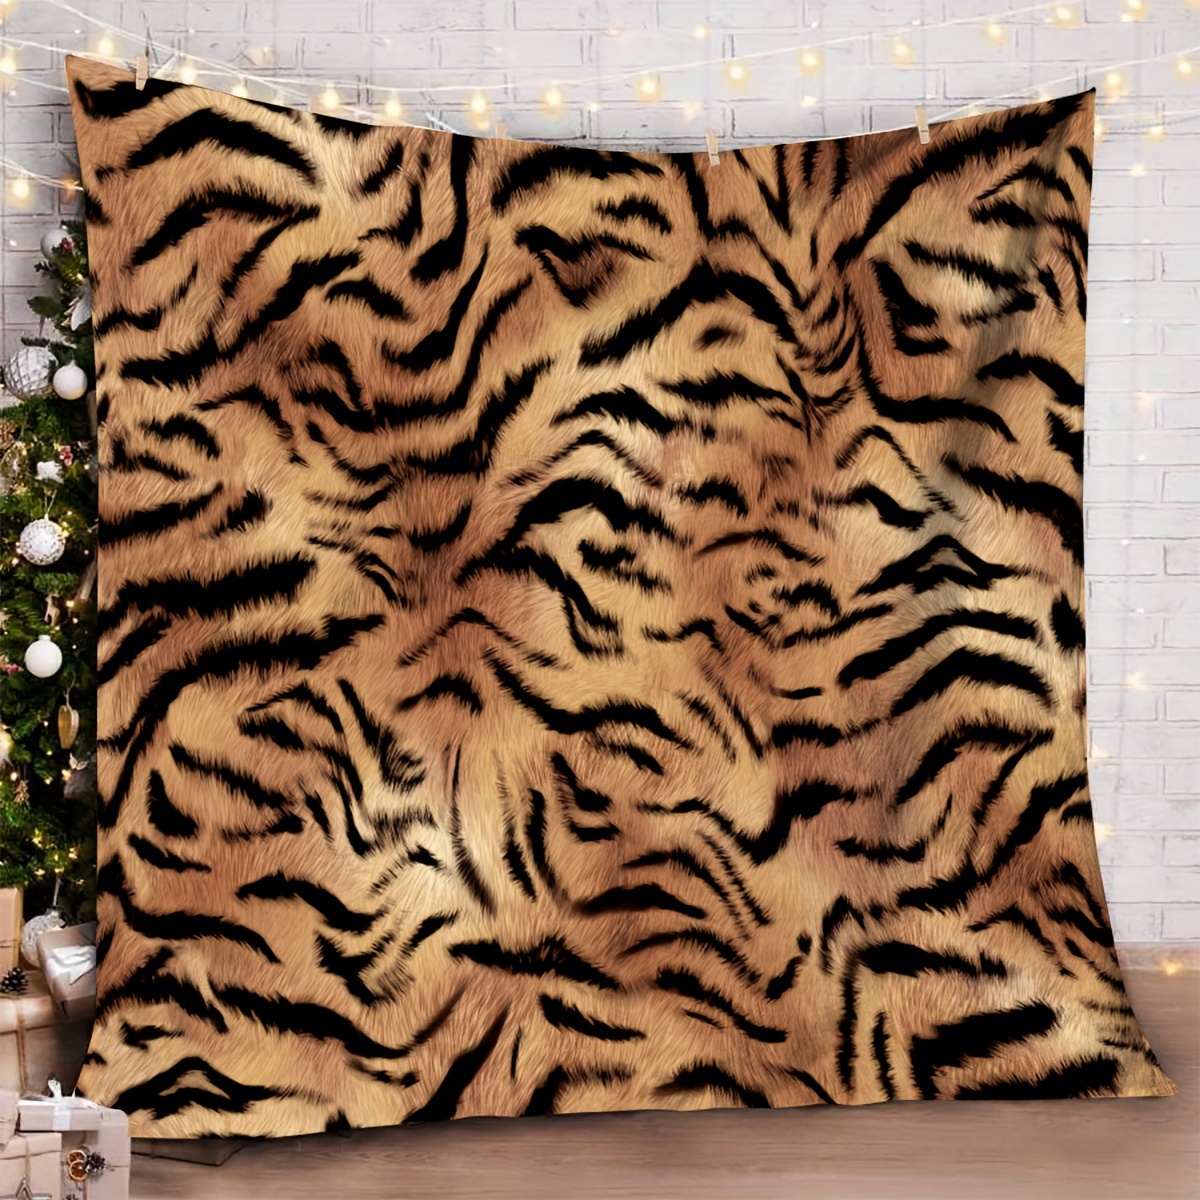 

1pc Holiday Gifts Blanket For Daughter Tiger Print Soft Blanket Flannel Blanket For Couch Sofa Office Bed Camping Travel, Multi-purpose Gift Blanket For All Season